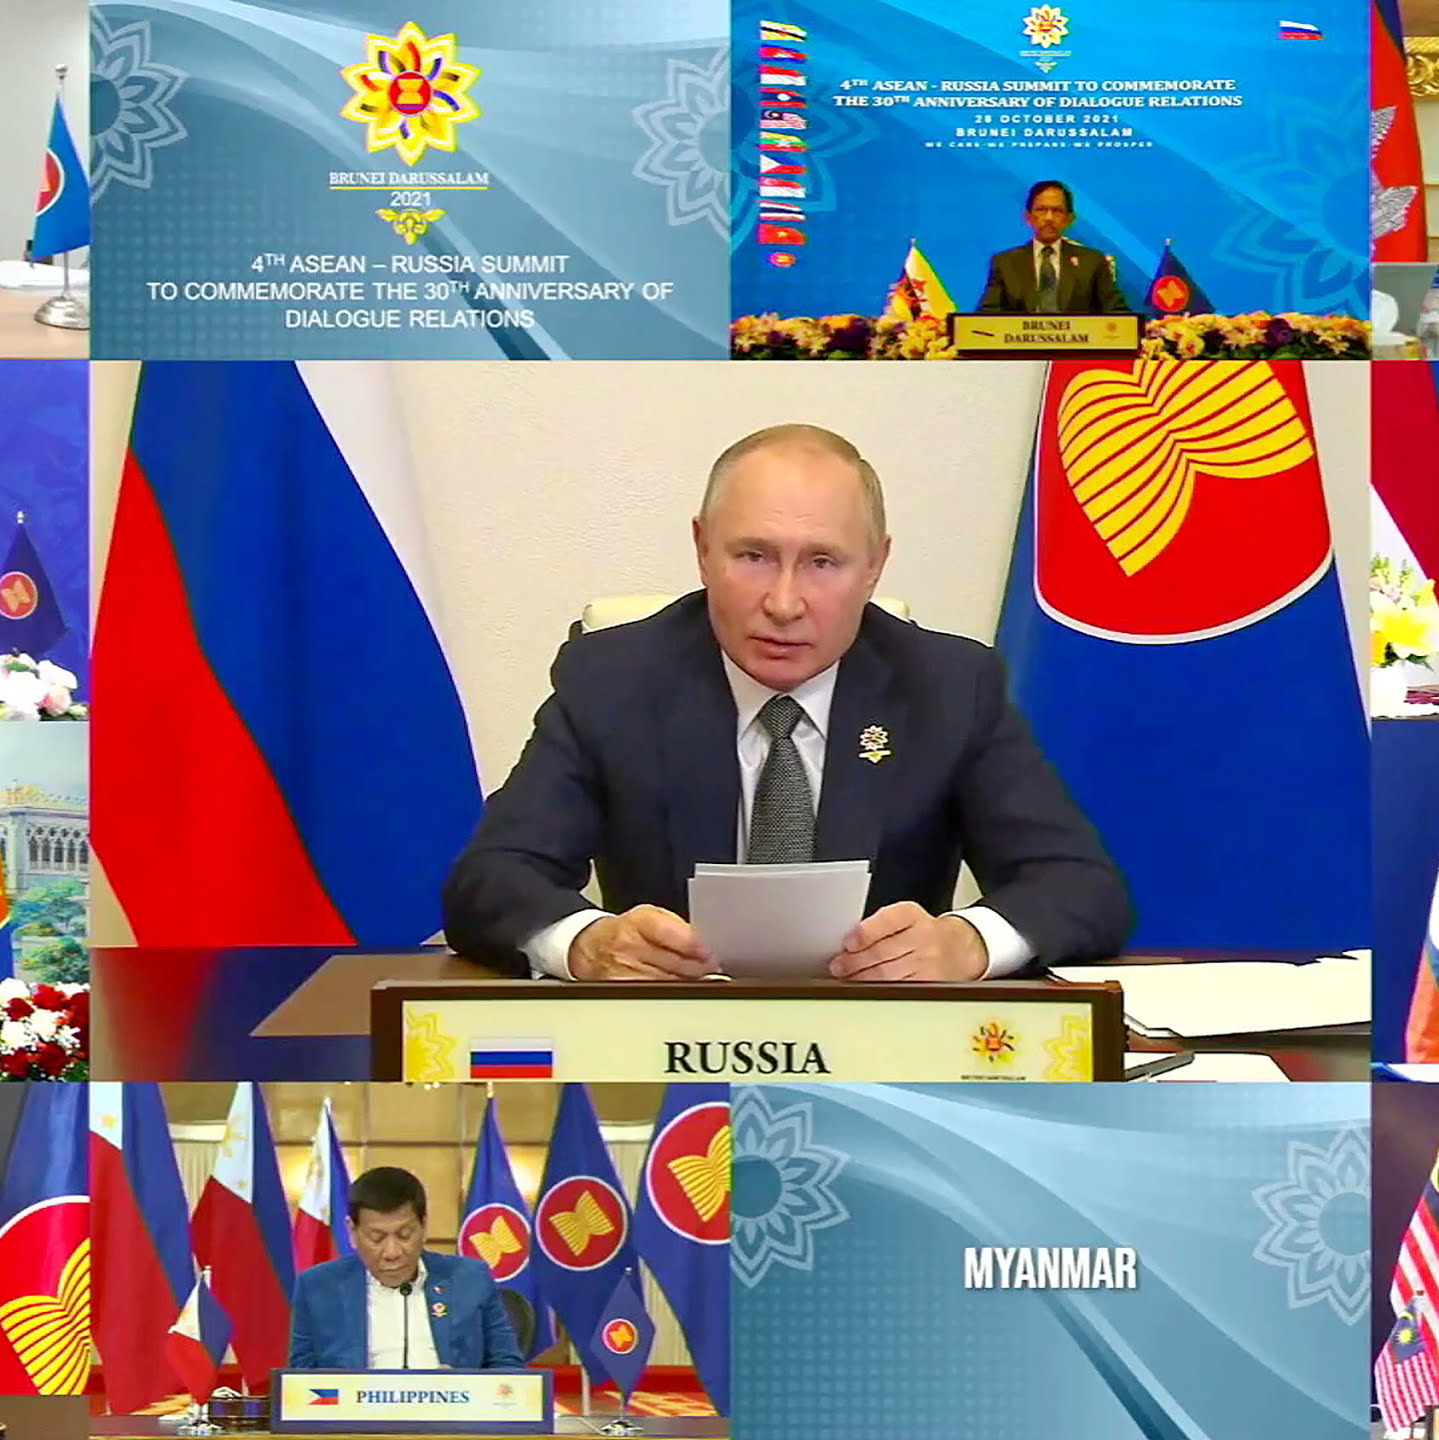 President Vladimir V. Putin of Russia speaking during a virtual summit hosted by the Association of Southeast Asian Nations, or ASEAN, in Bandar Seri Begawan, Brunei, last year.